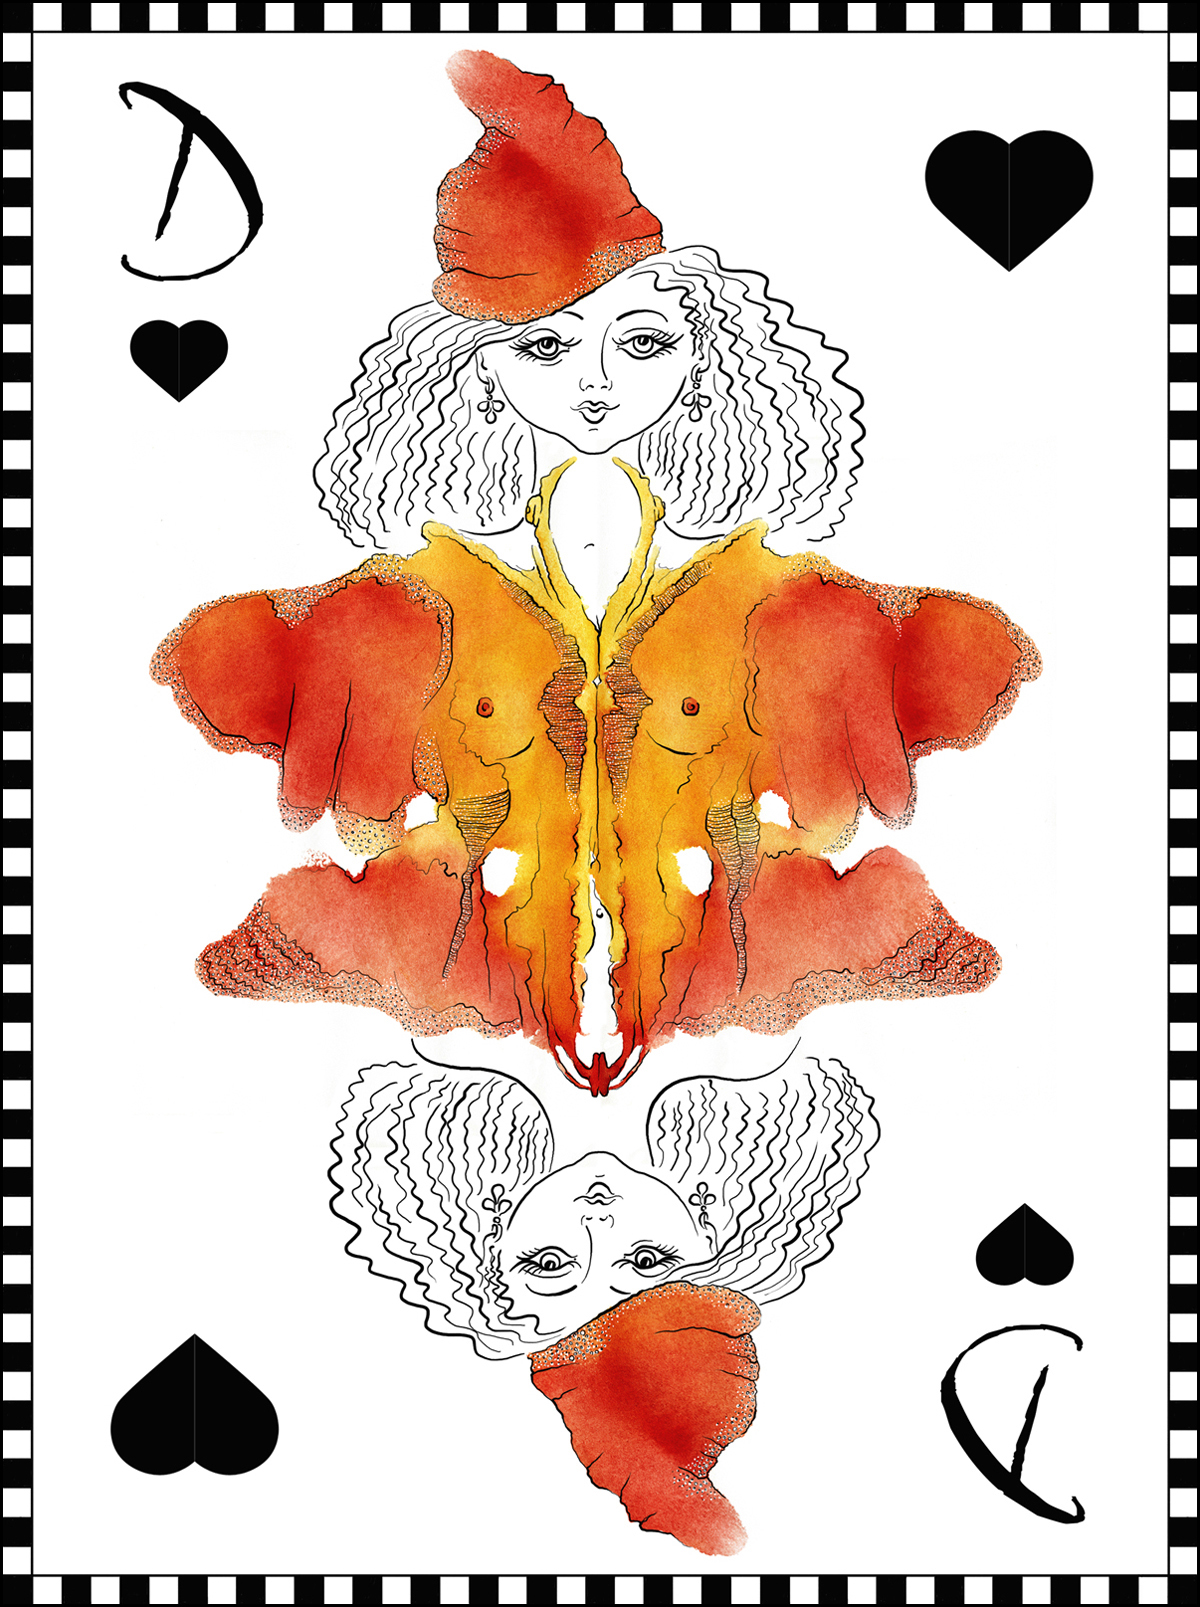 Playing Cards  watercolour illustrations  analog  digital drawings Erotic Touch imaginary